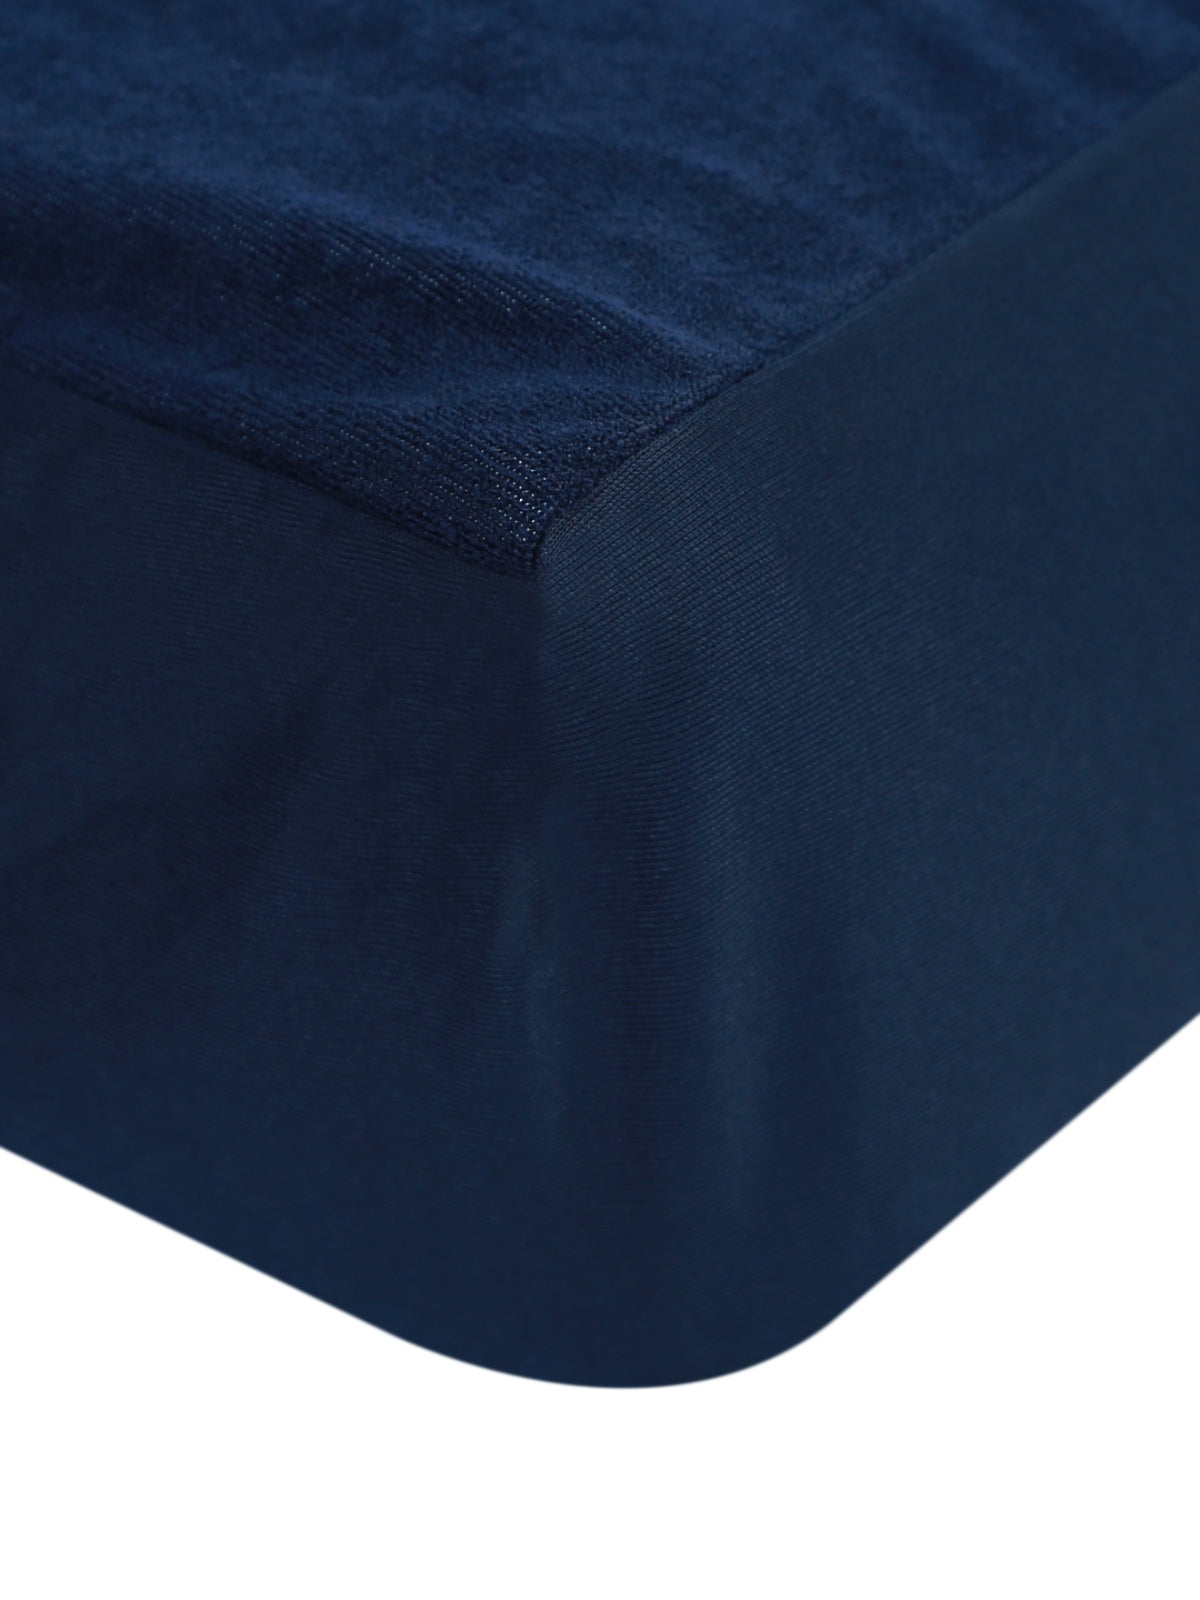 Dark Blue Terry Cloth Waterproof Mattress Protector for King Size